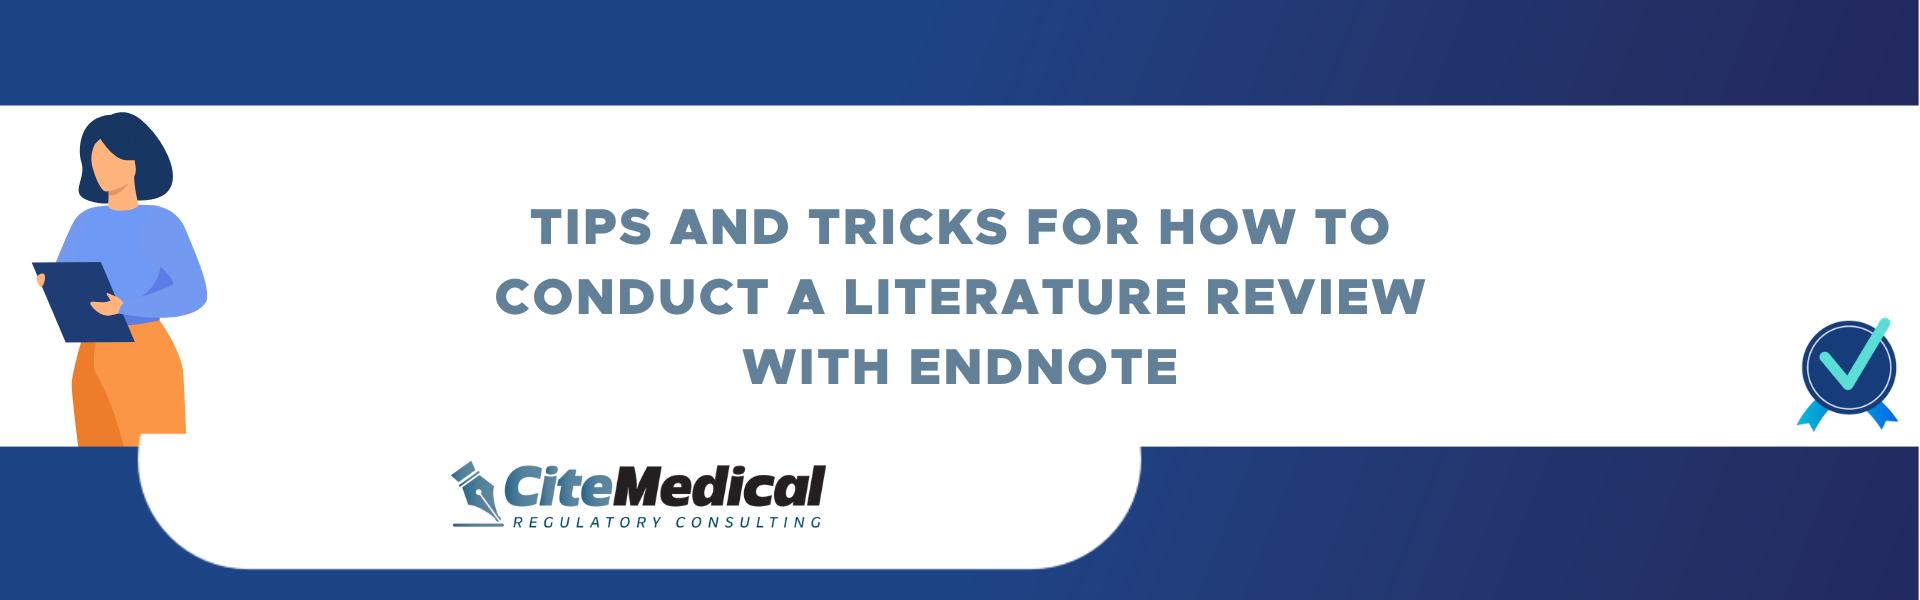 Conduct a Literature Review with Endnote